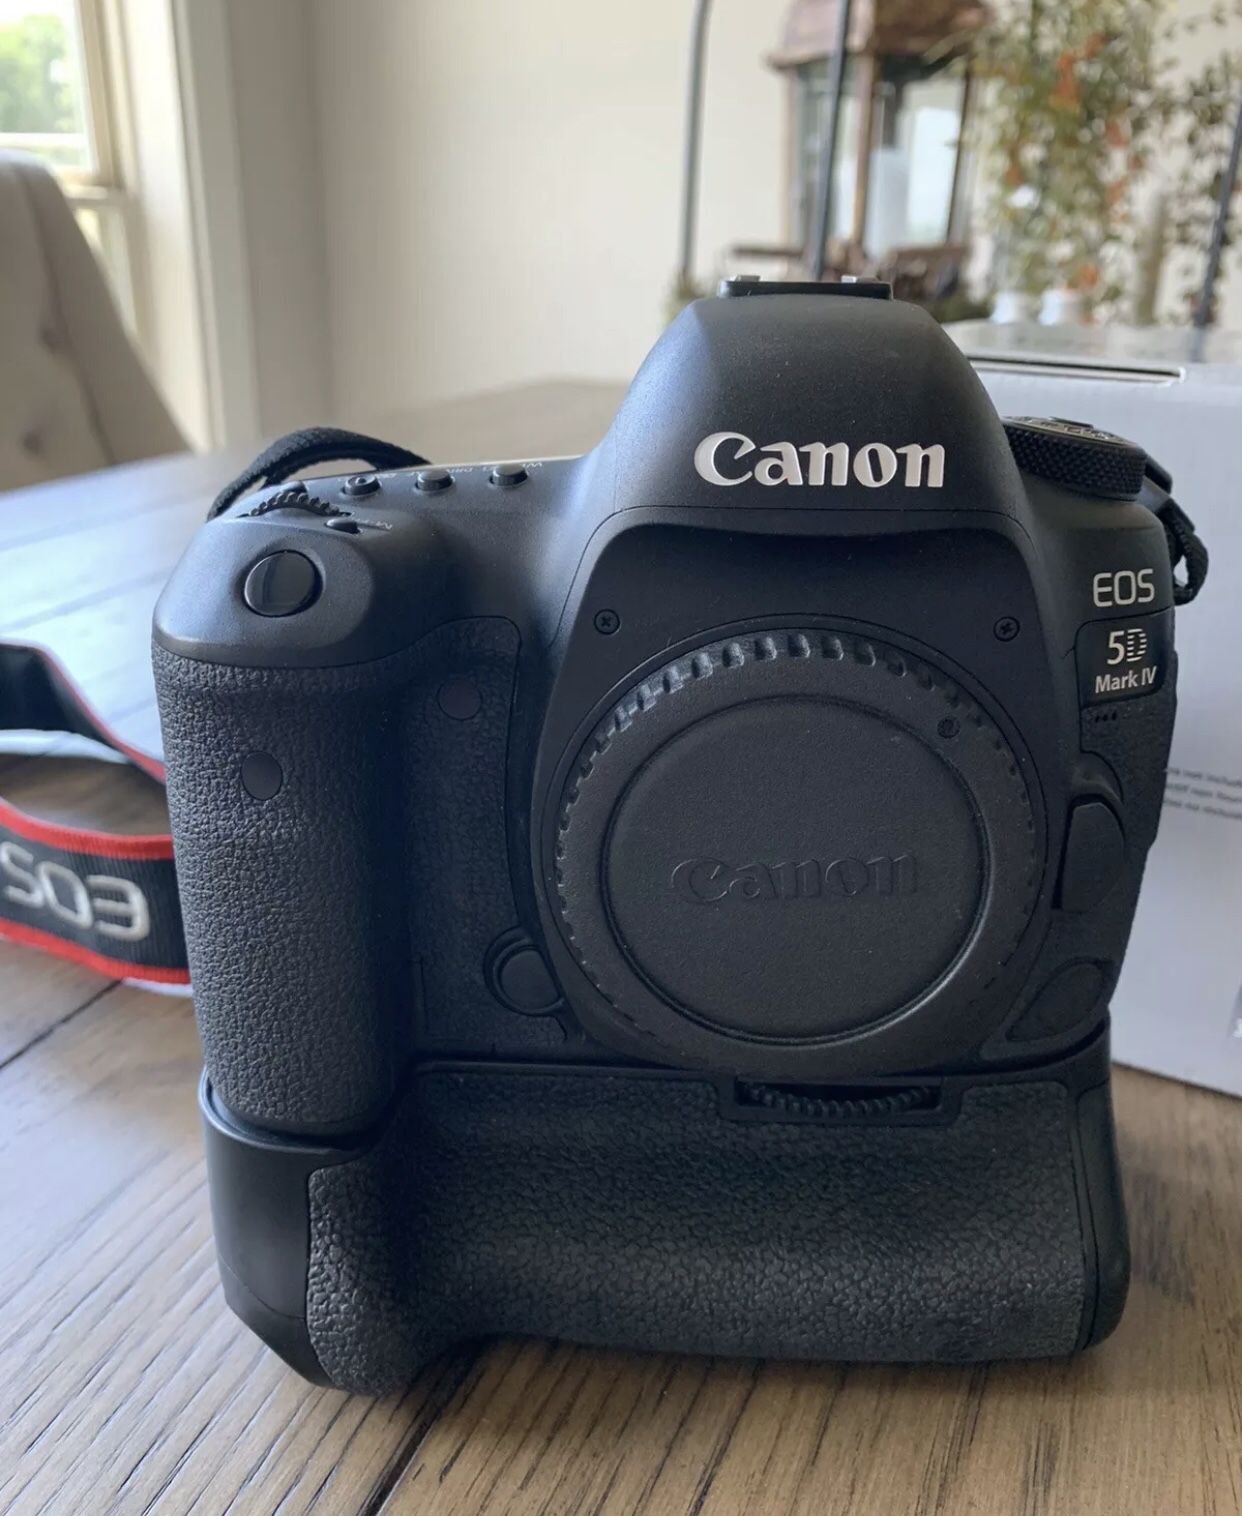 Canon EOS 5D Mark IV 30.4MP Digital SLR Camera - Black (Body Only) With Extras!